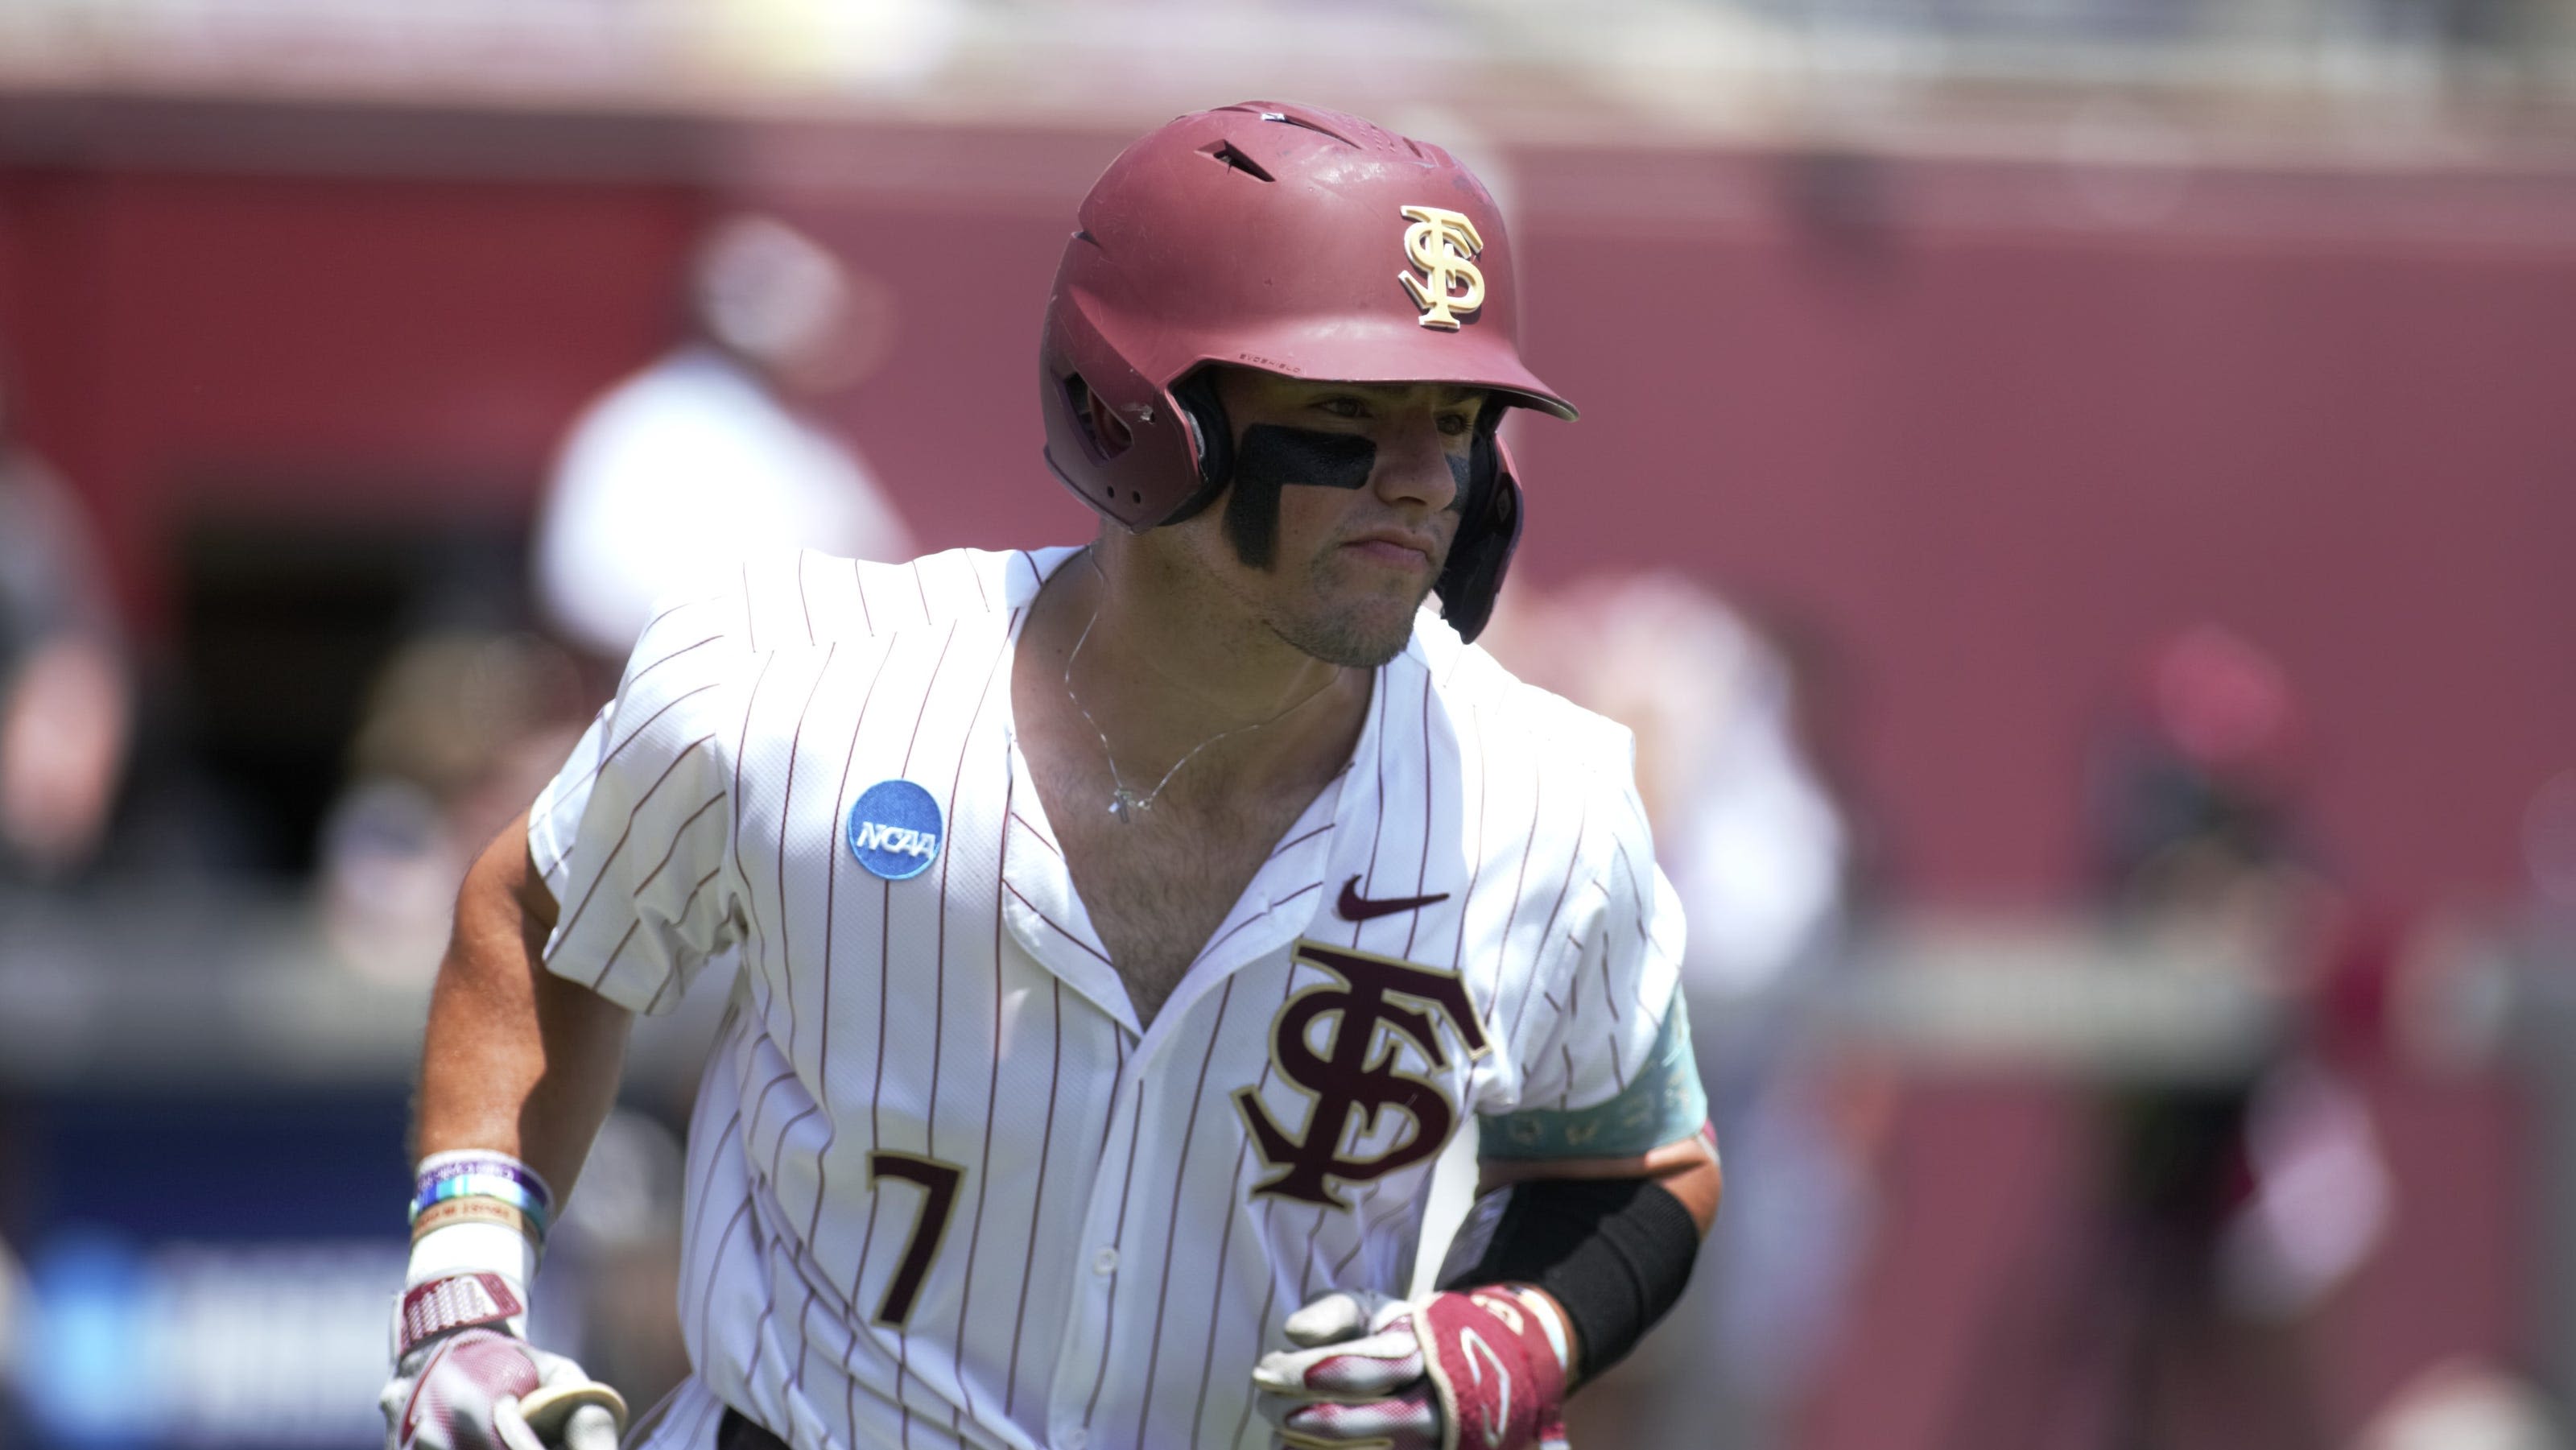 UConn to 'turn the page' after historic game one Super Regional showing by FSU baseball